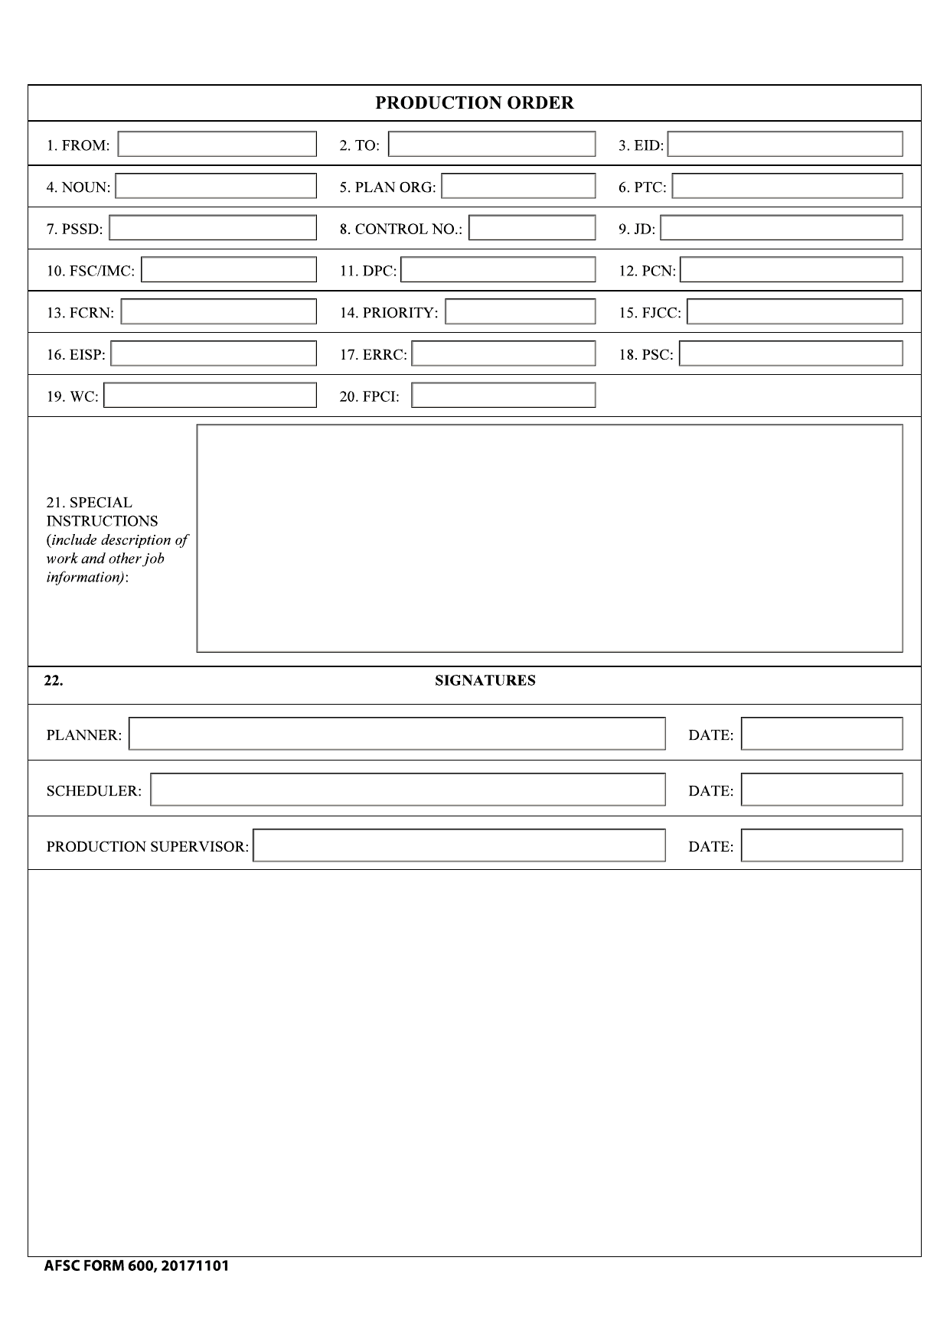 AFSC Form 600 Production Order, Page 1